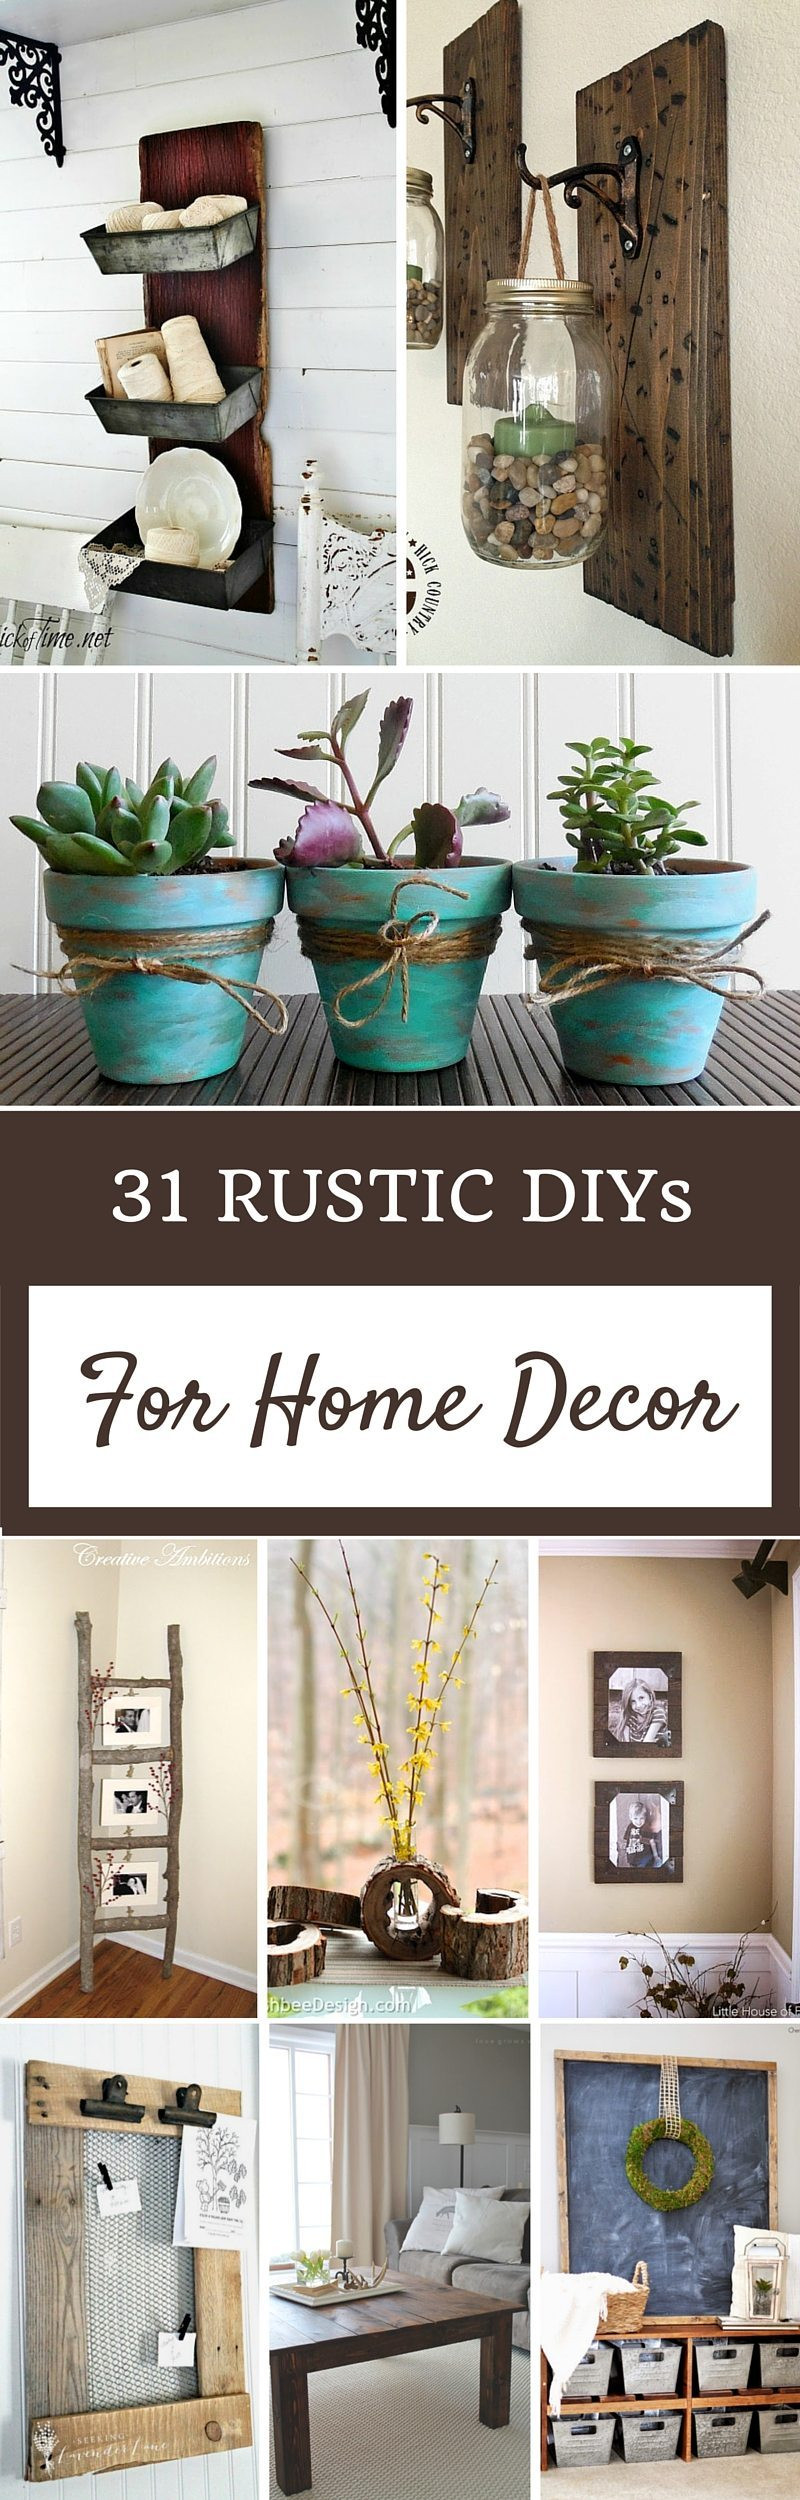 DIY Home Decore
 31 Rustic DIY Home Decor Projects